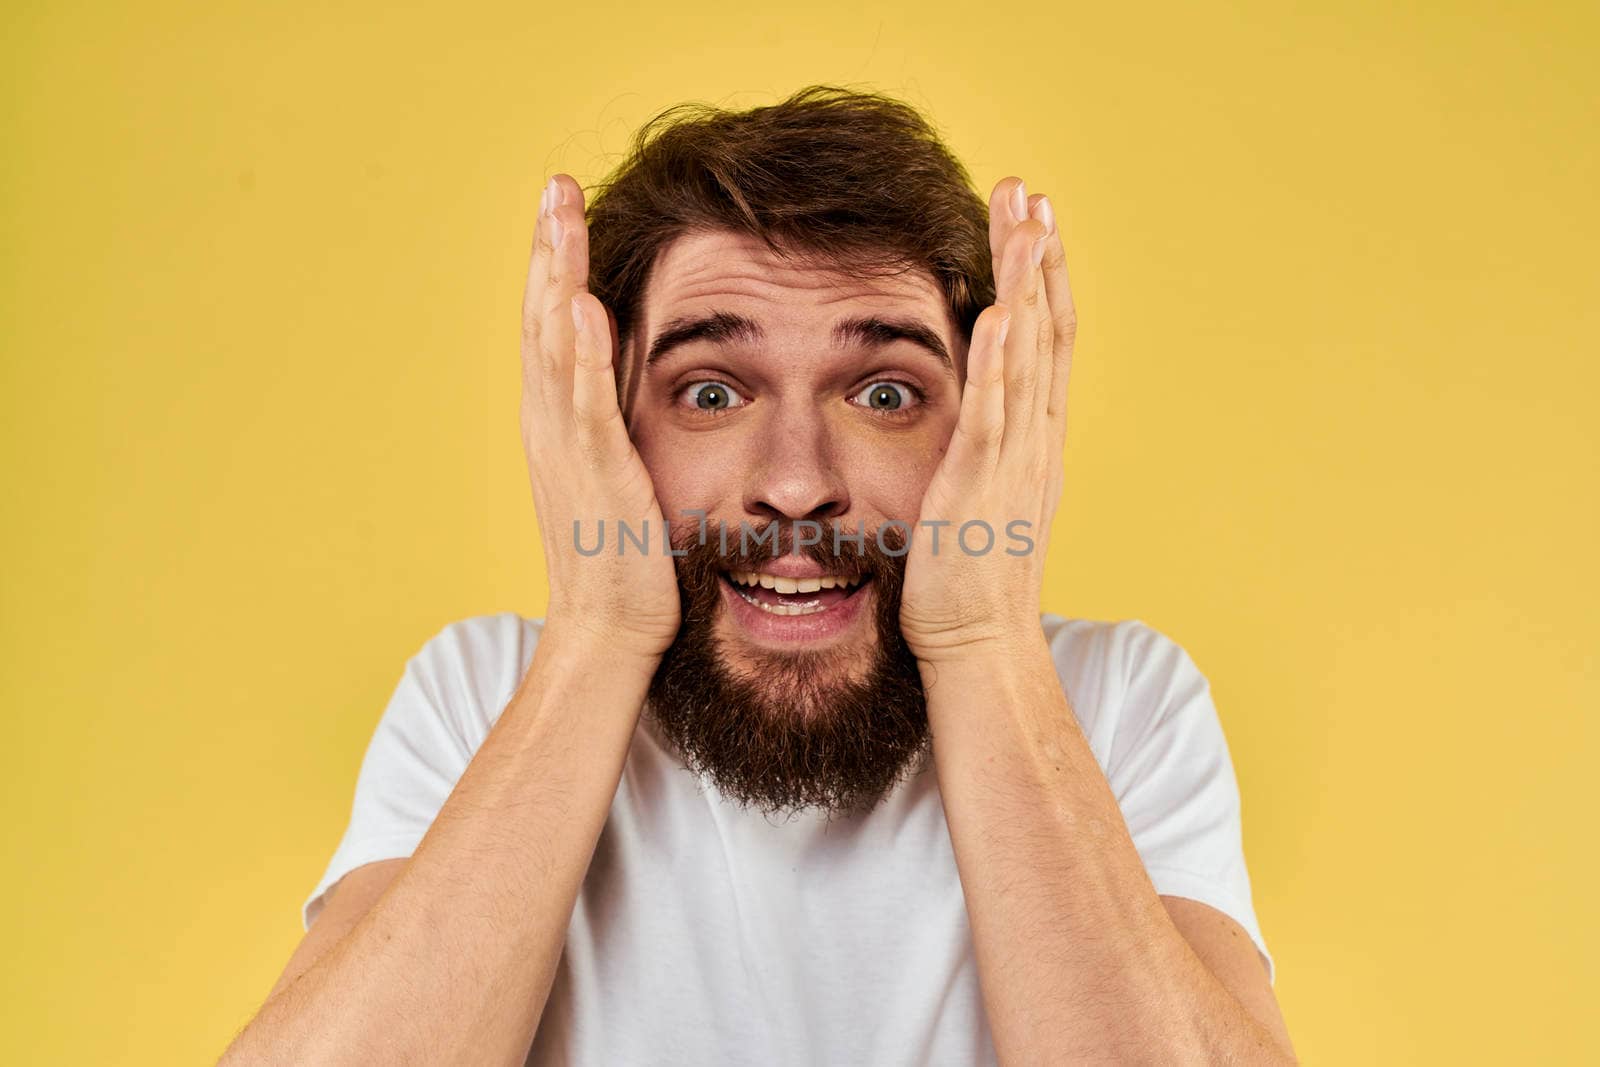 A man in a white t-shirt gestures with his hands lifestyle cropped view yellow background more fun. High quality photo